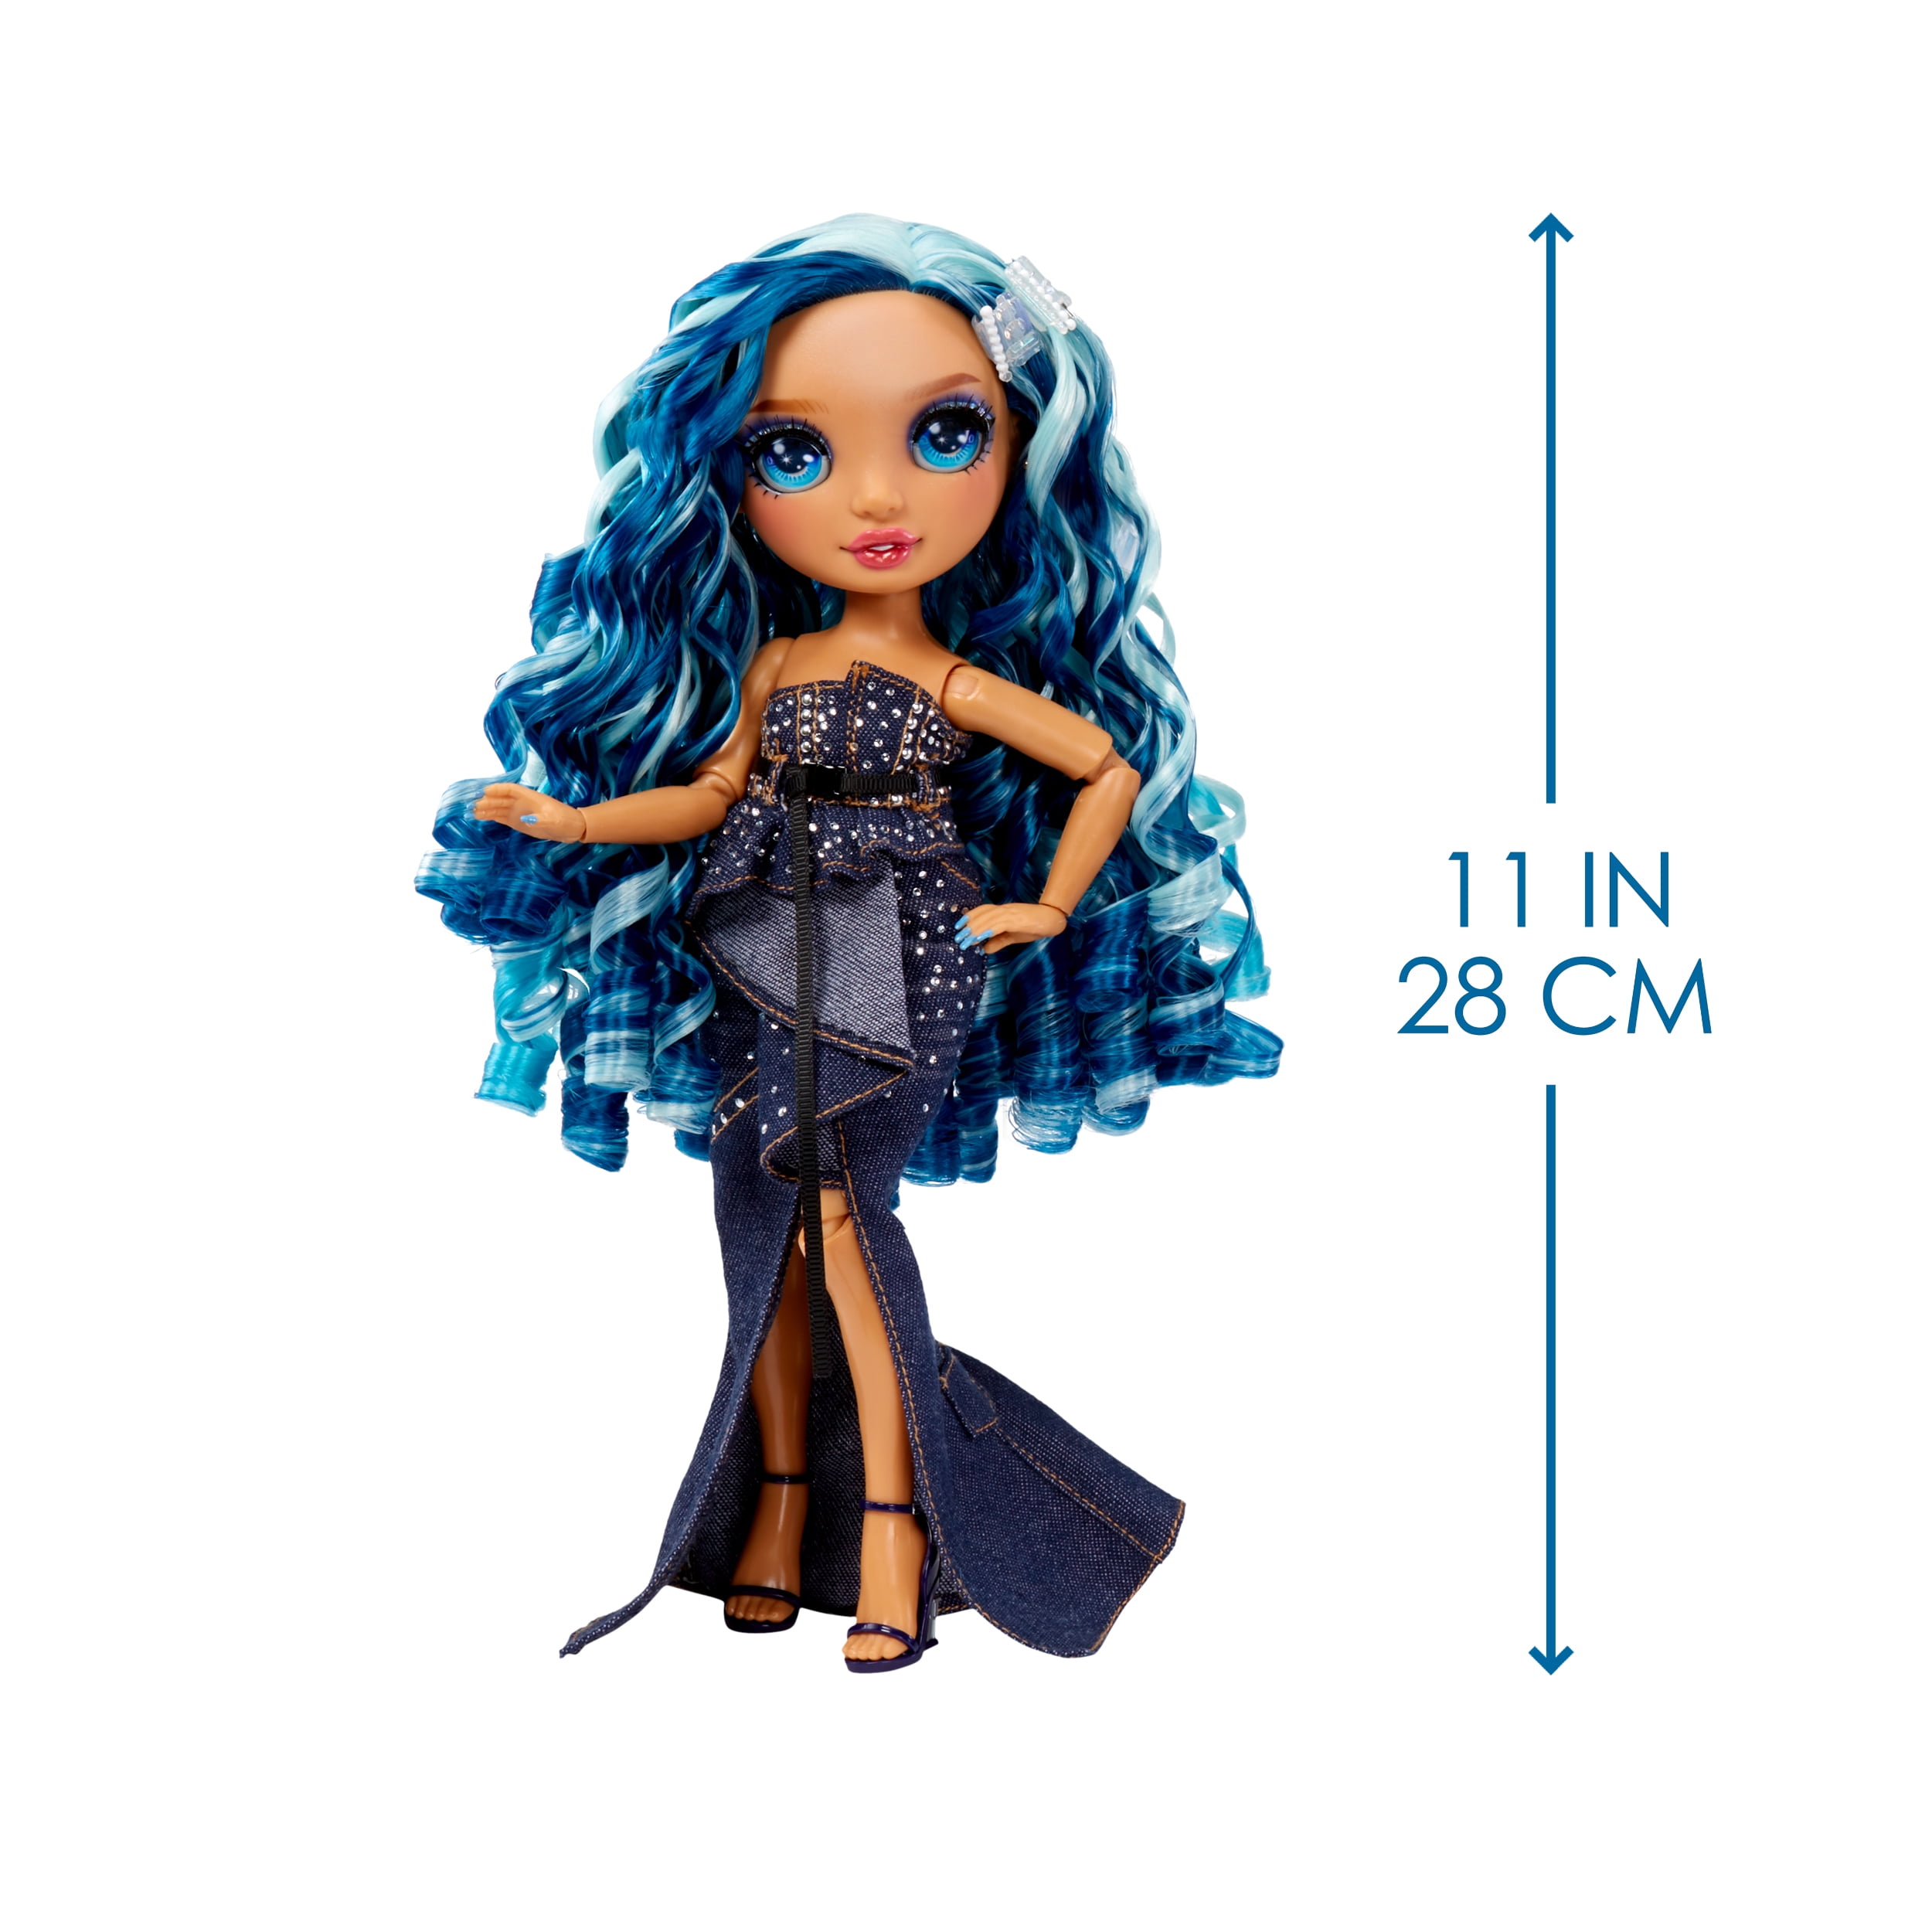 Rainbow High Blu - Blue Fashion Doll in Fashionable Outfit, Wearing a Cast  & 10+ Colorful Play Accessories. Gift for Kids 4-12 Years Old and  Collectors. 